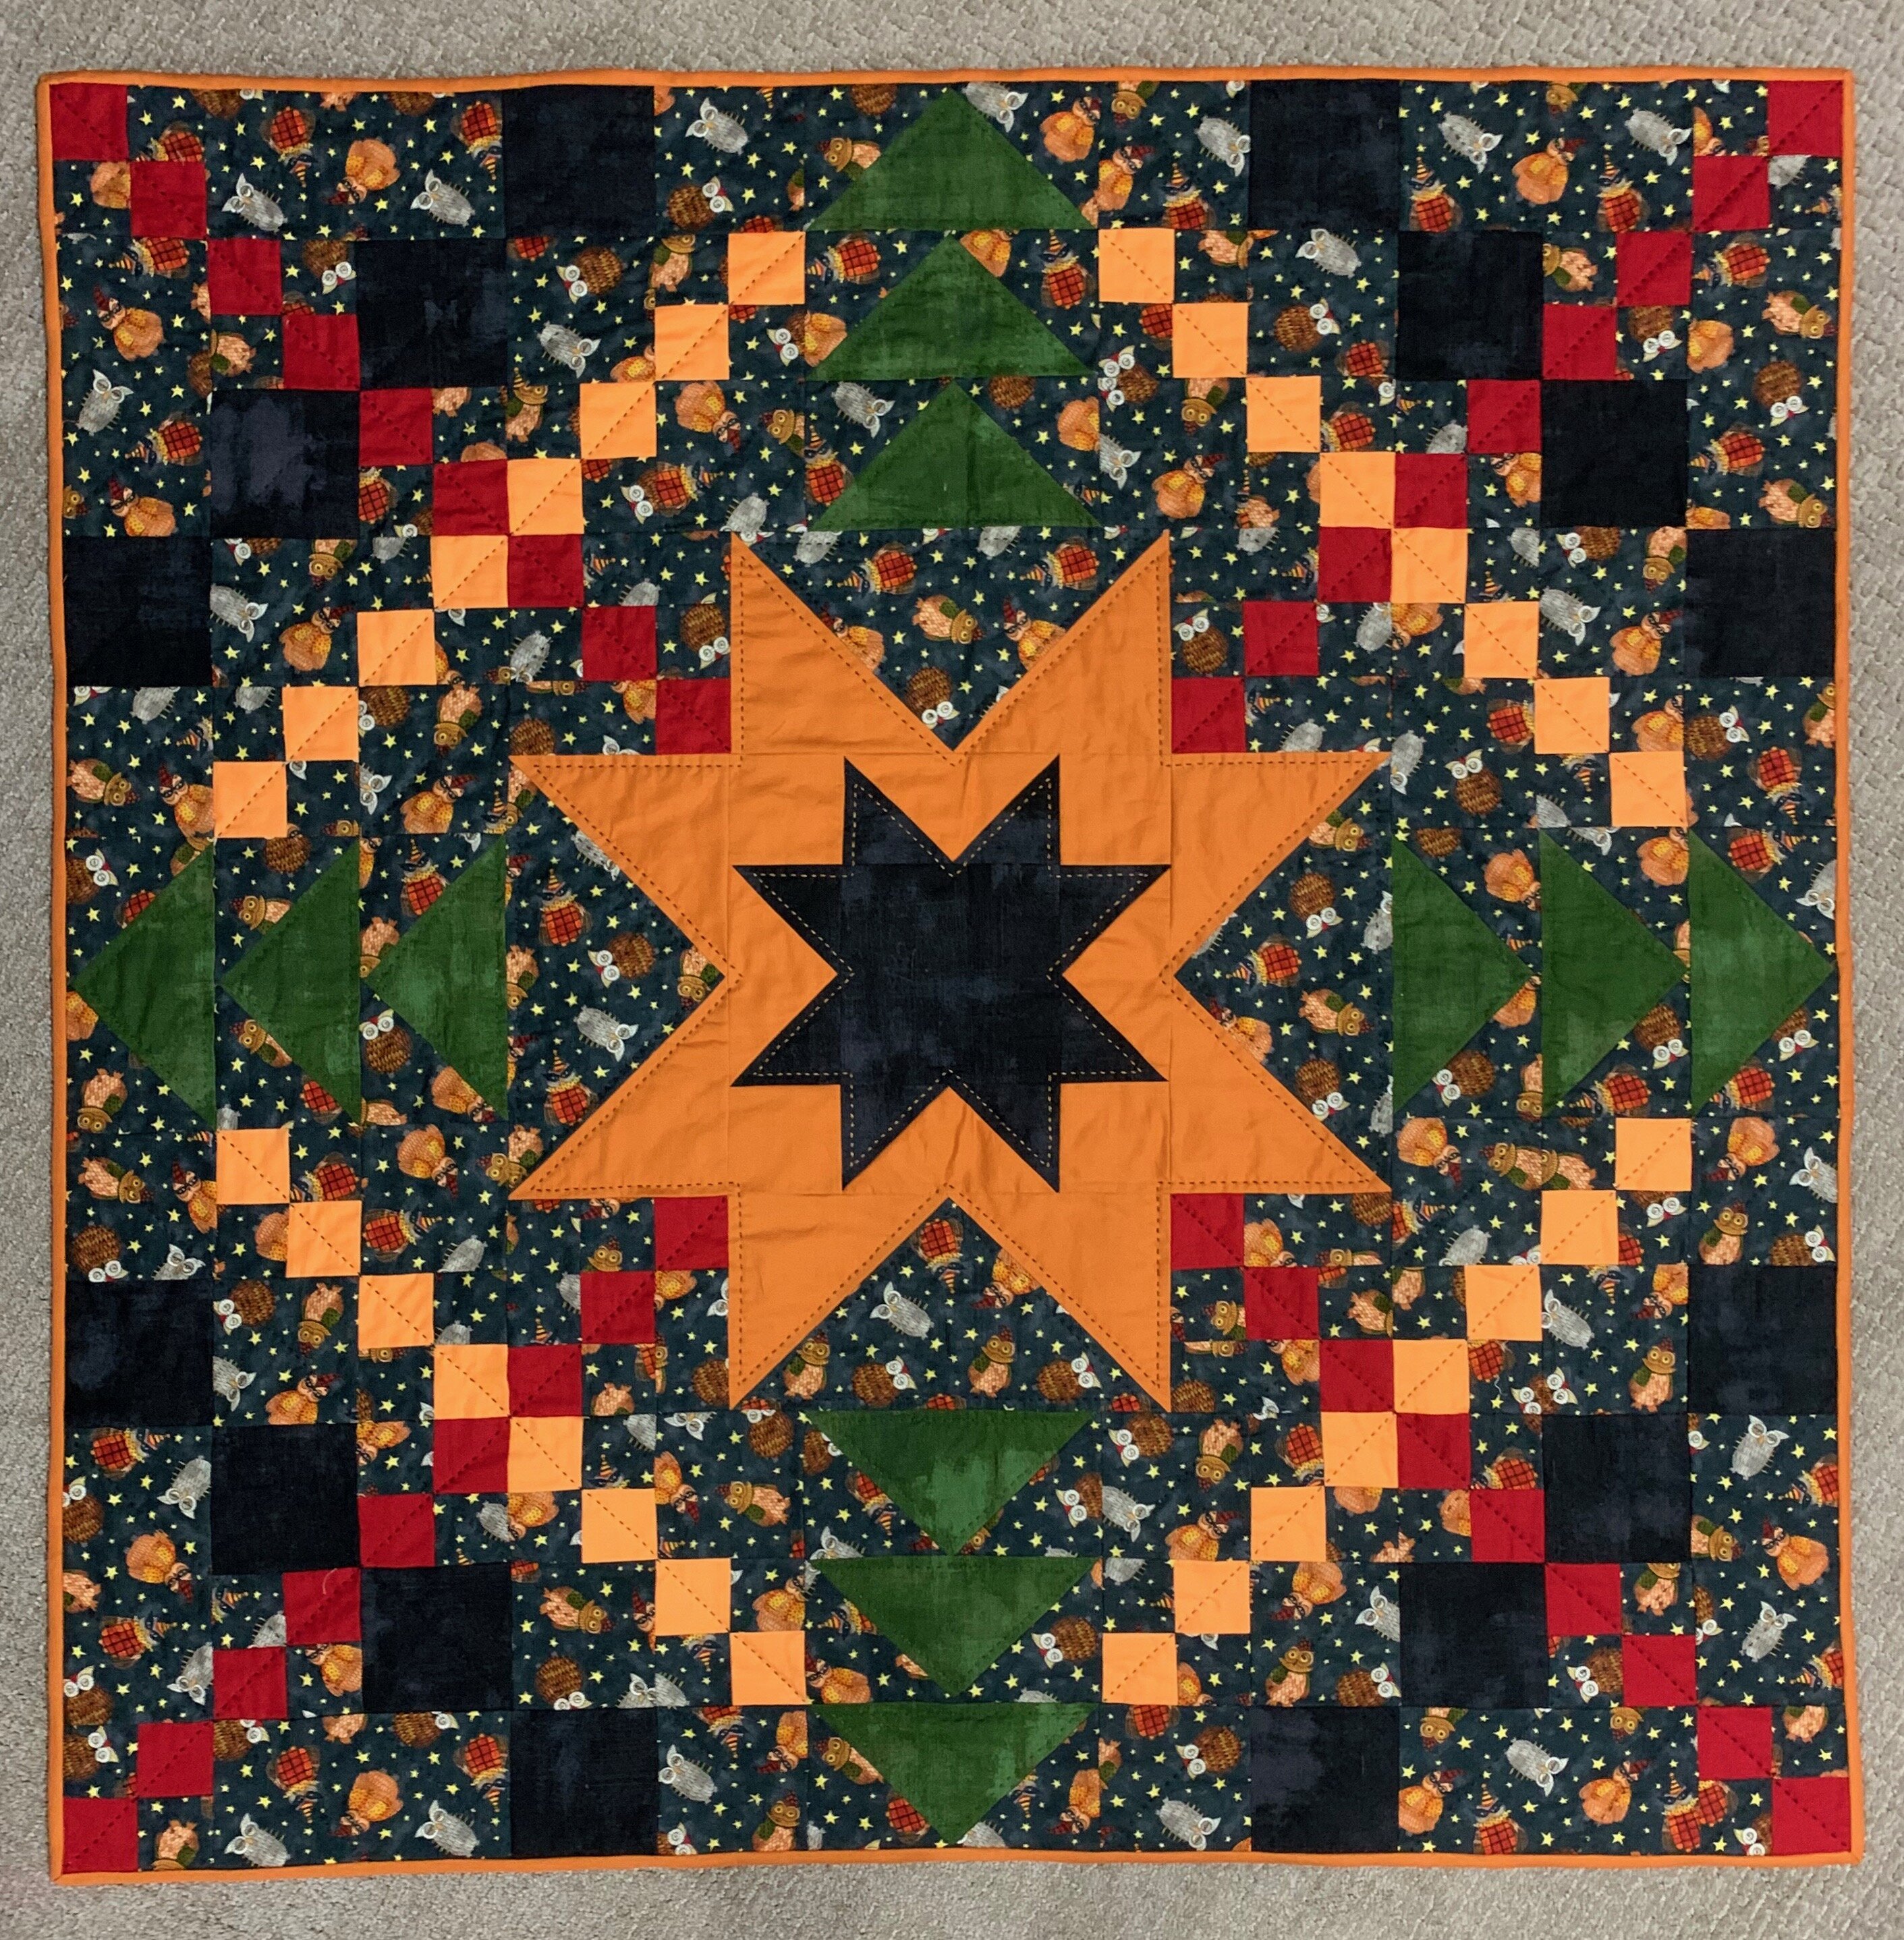 A quilt made by Christine Paul